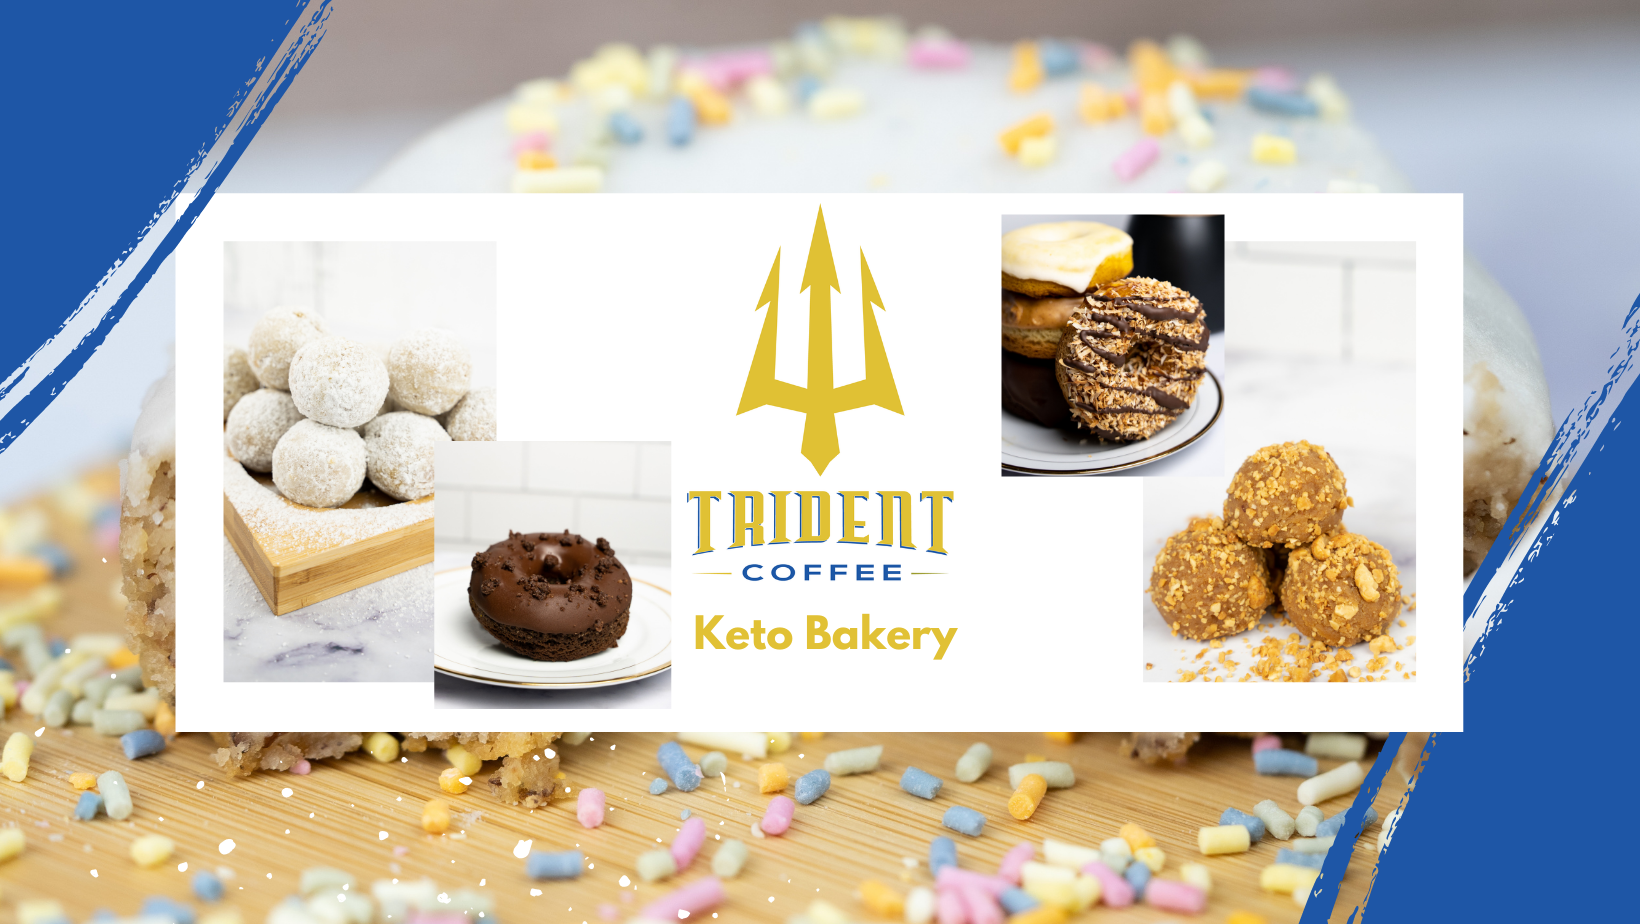 https://tridentcoffee.com/pages/trident-coffee-bakery